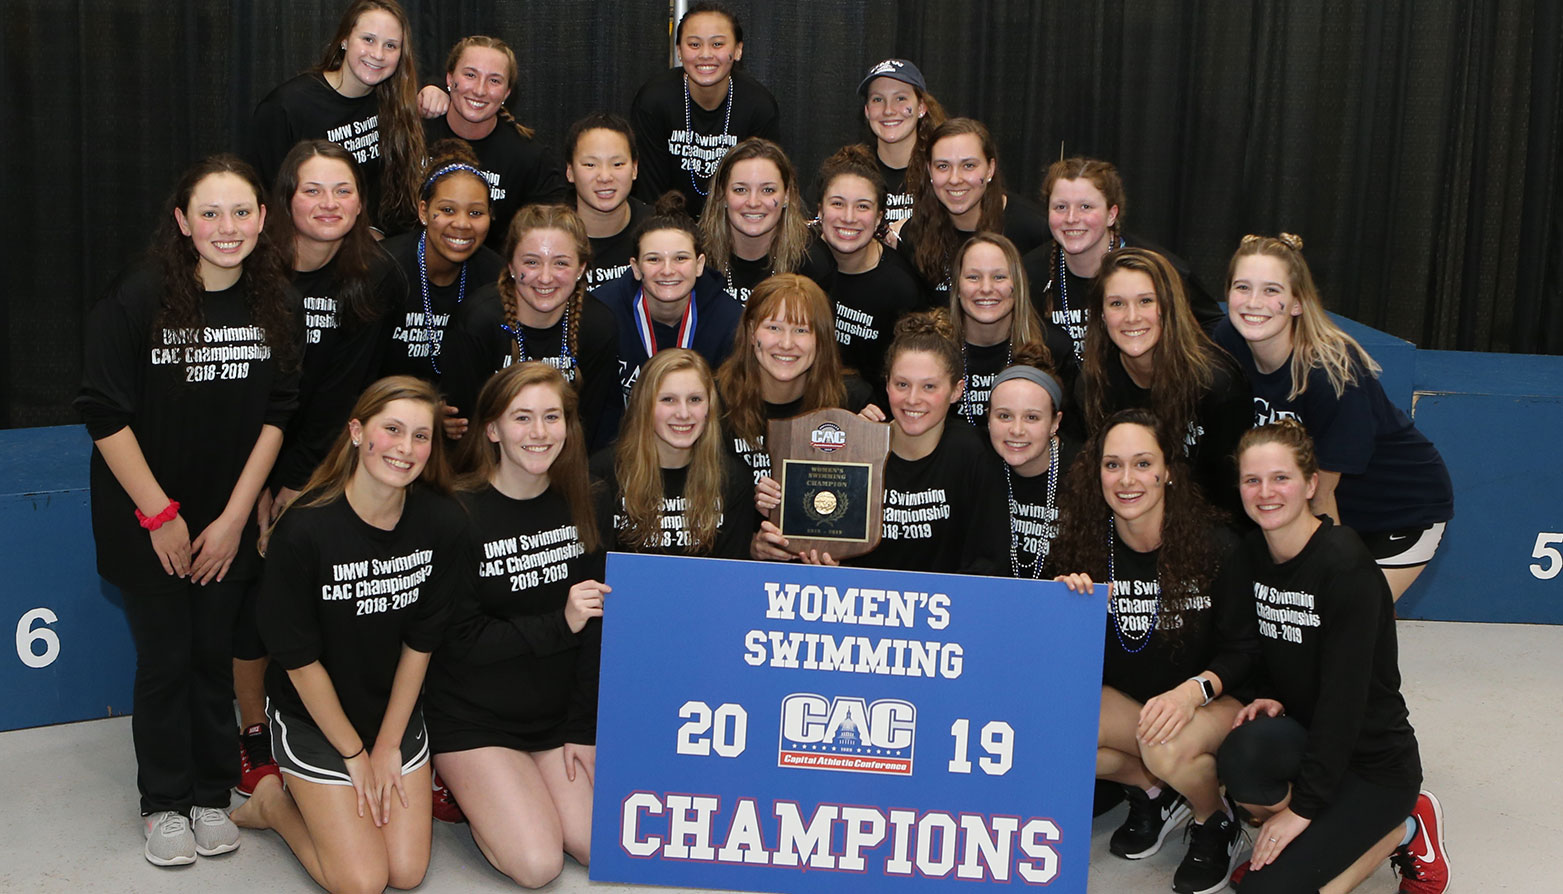 Mary Washington Women's Swimming Wins 29th Consecutive CAC Championship; UMW's Carley Vaughn Selected Swimmer of the Year